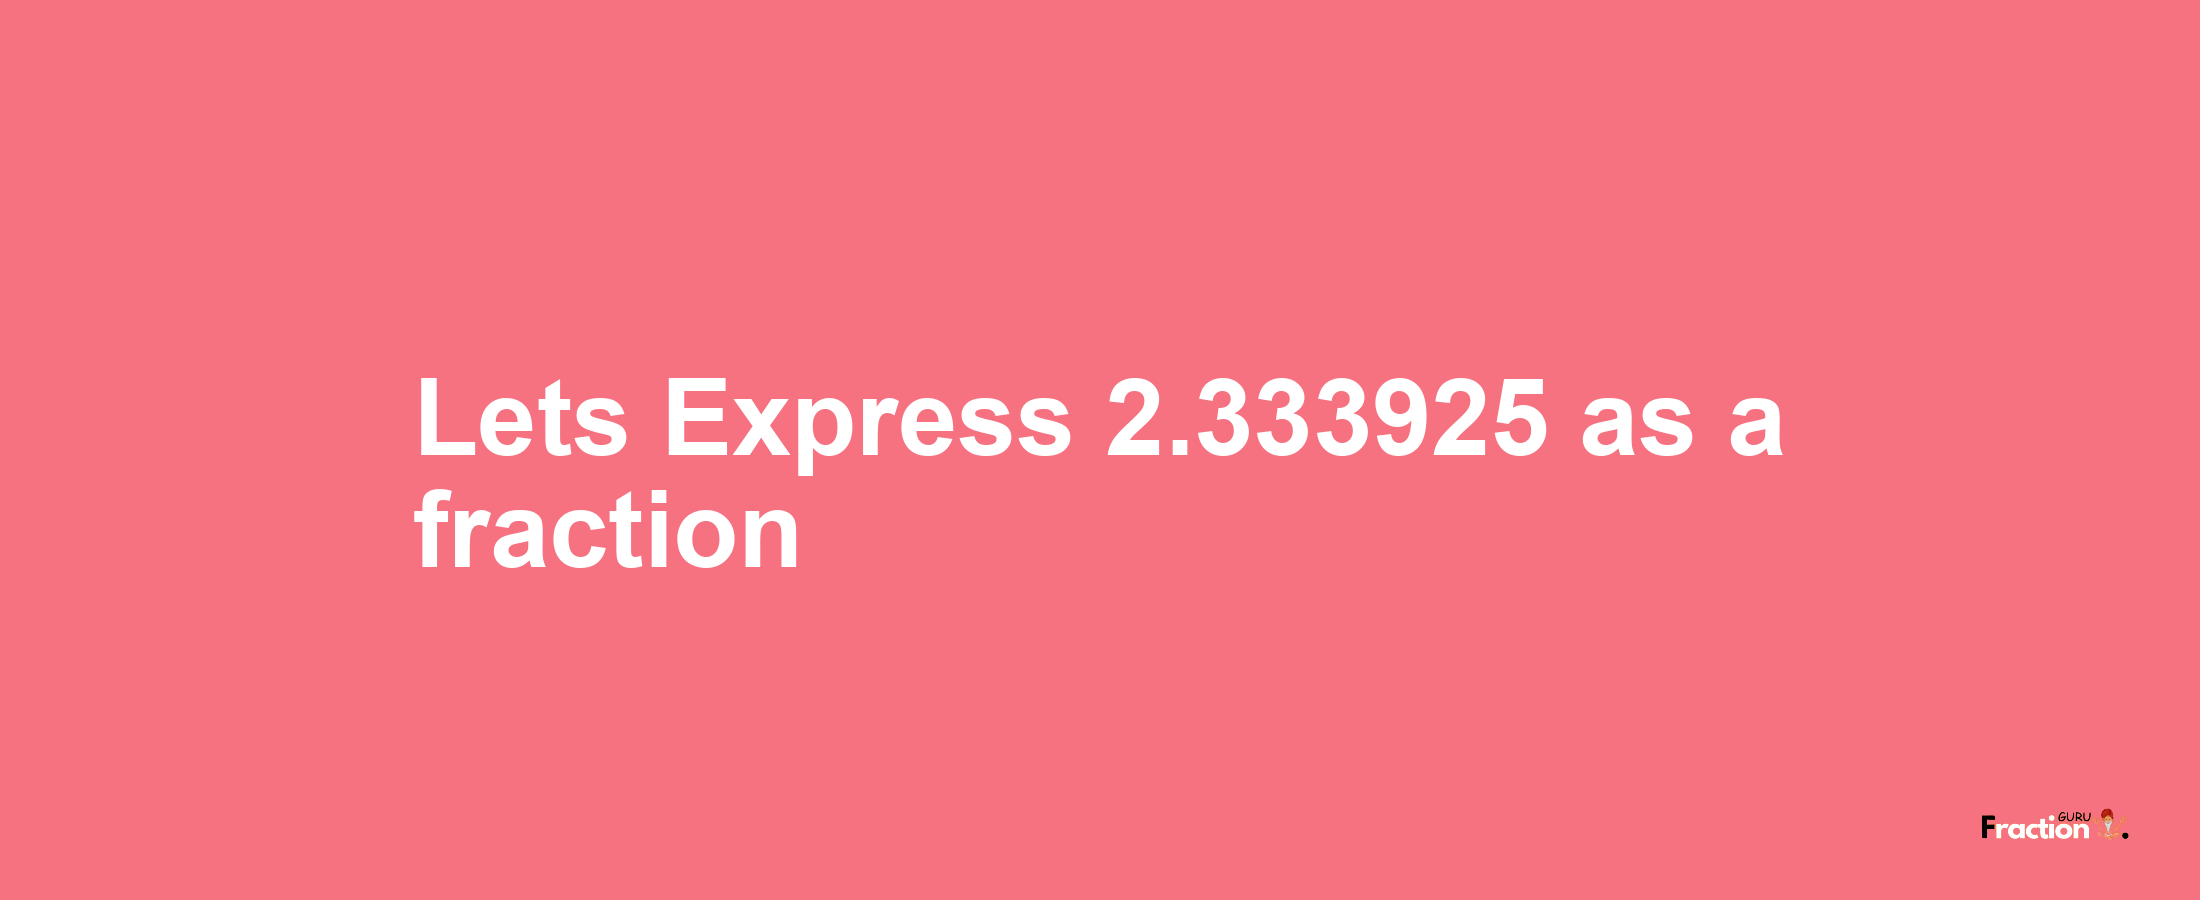 Lets Express 2.333925 as afraction